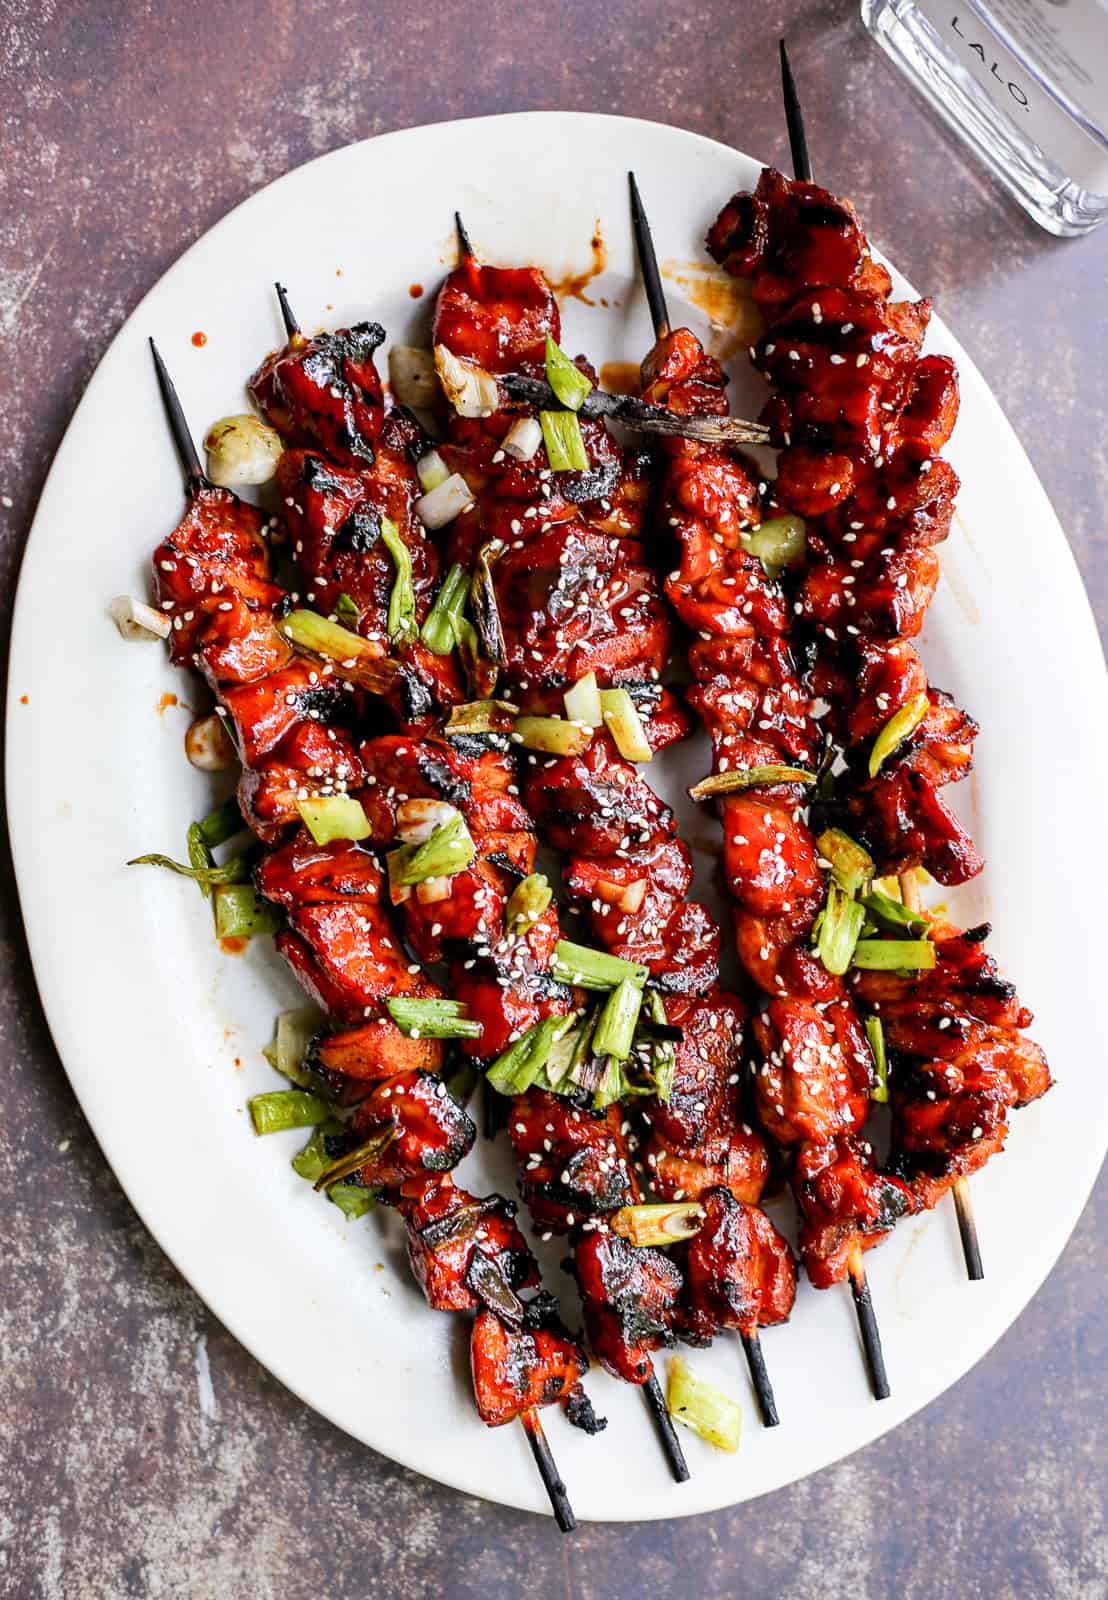 Korean-Inspired BBQ Chicken Skewers - The Defined Dish